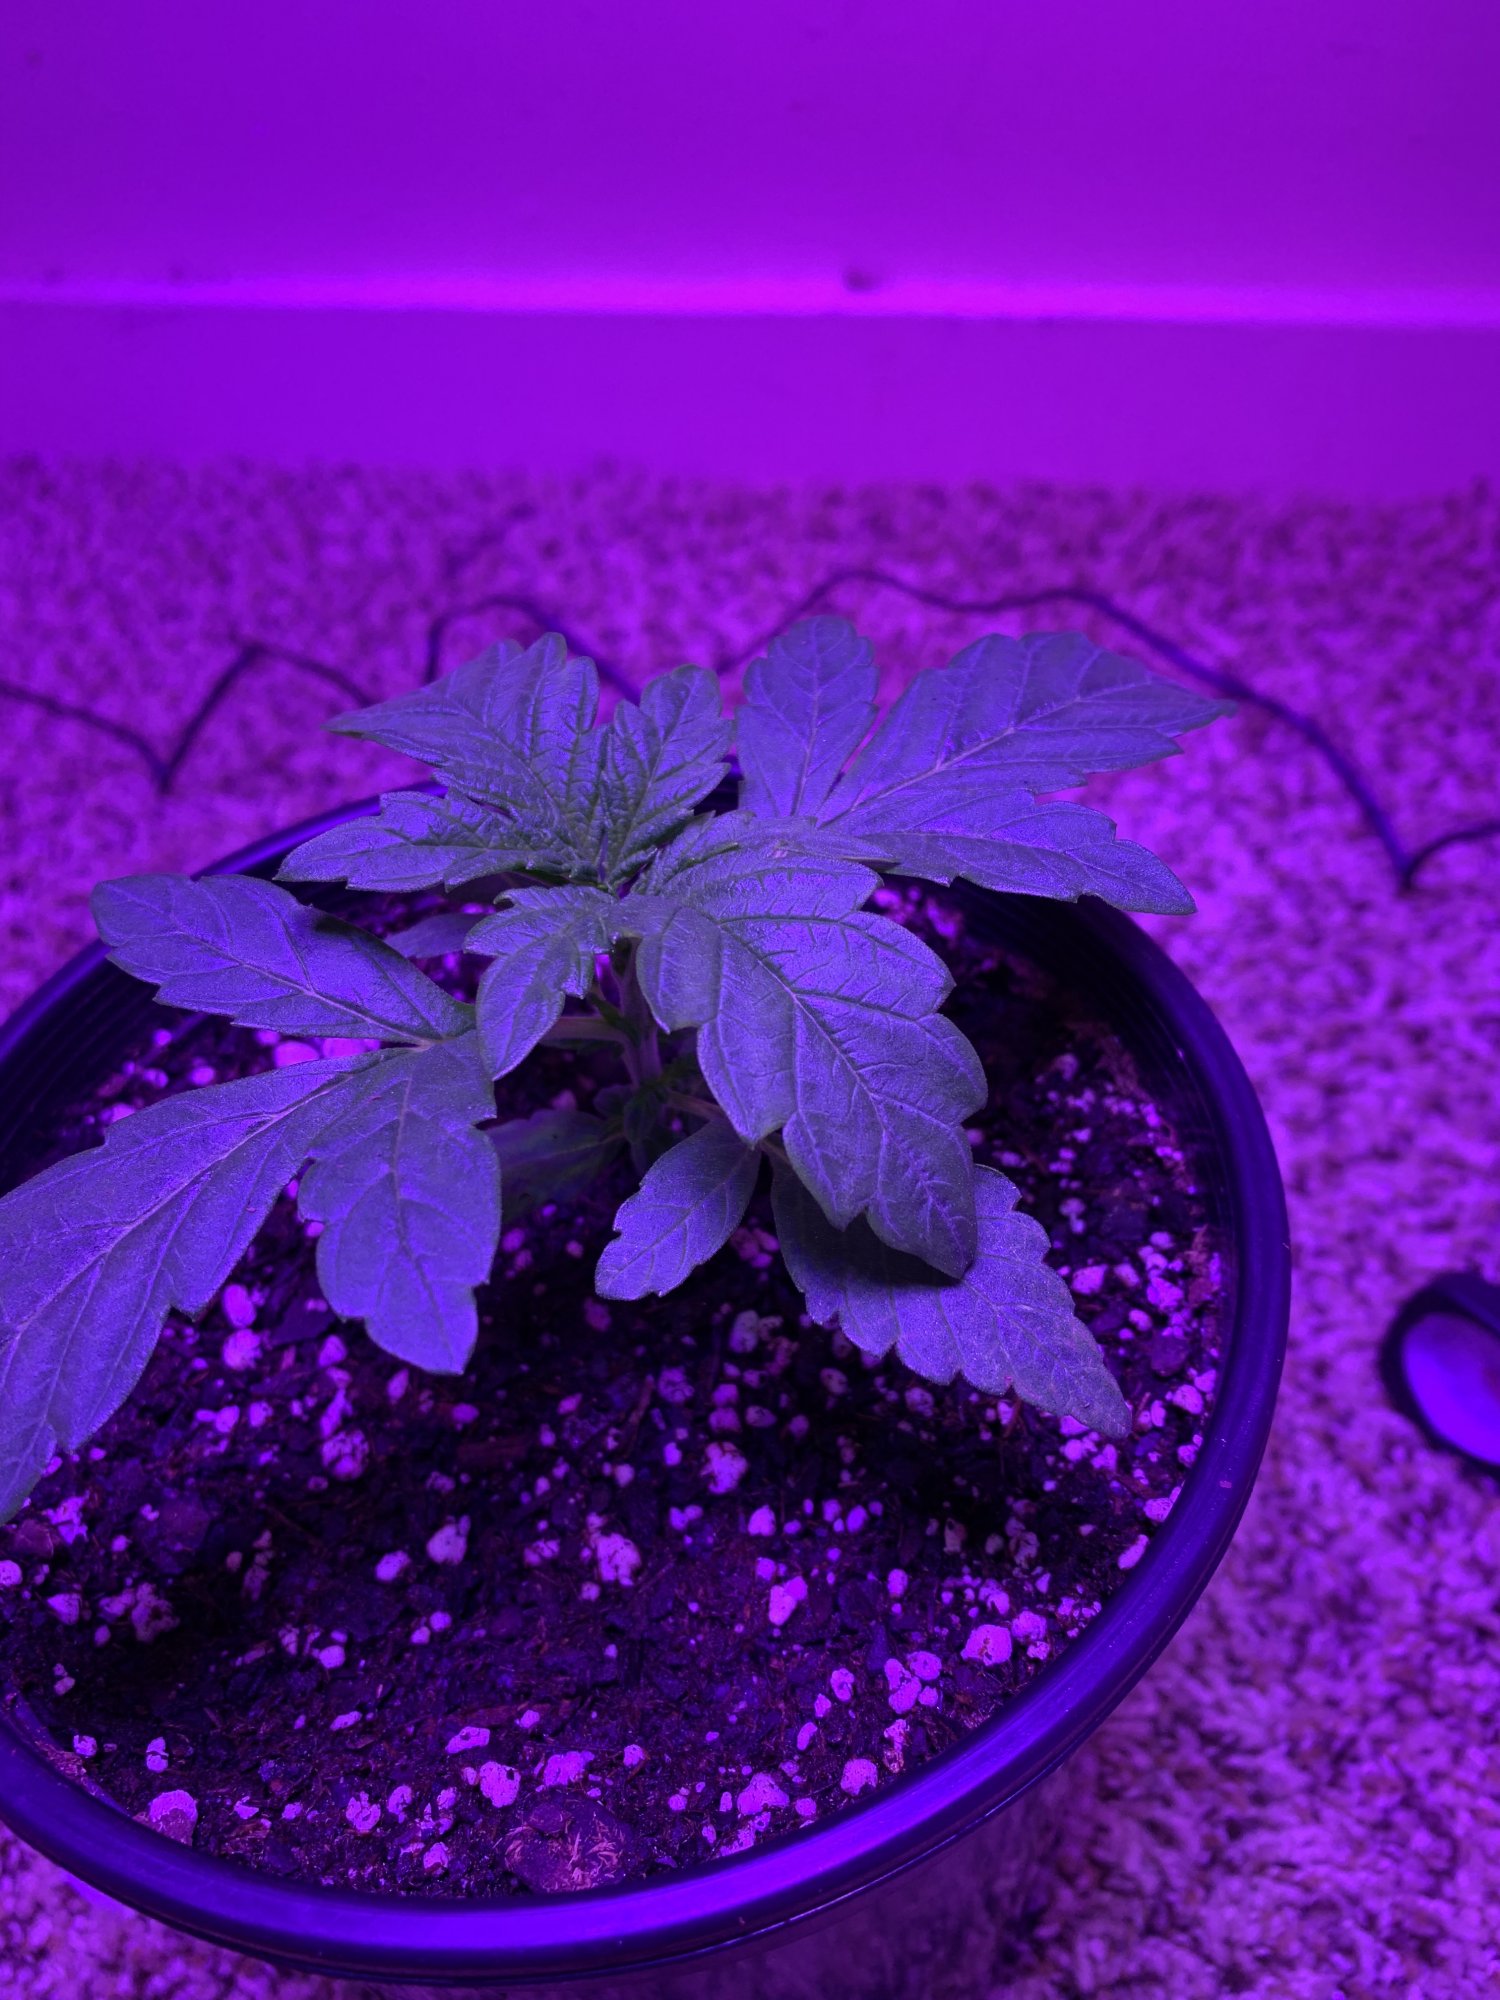 Need advice as soon as possible plants are in critical condition 3